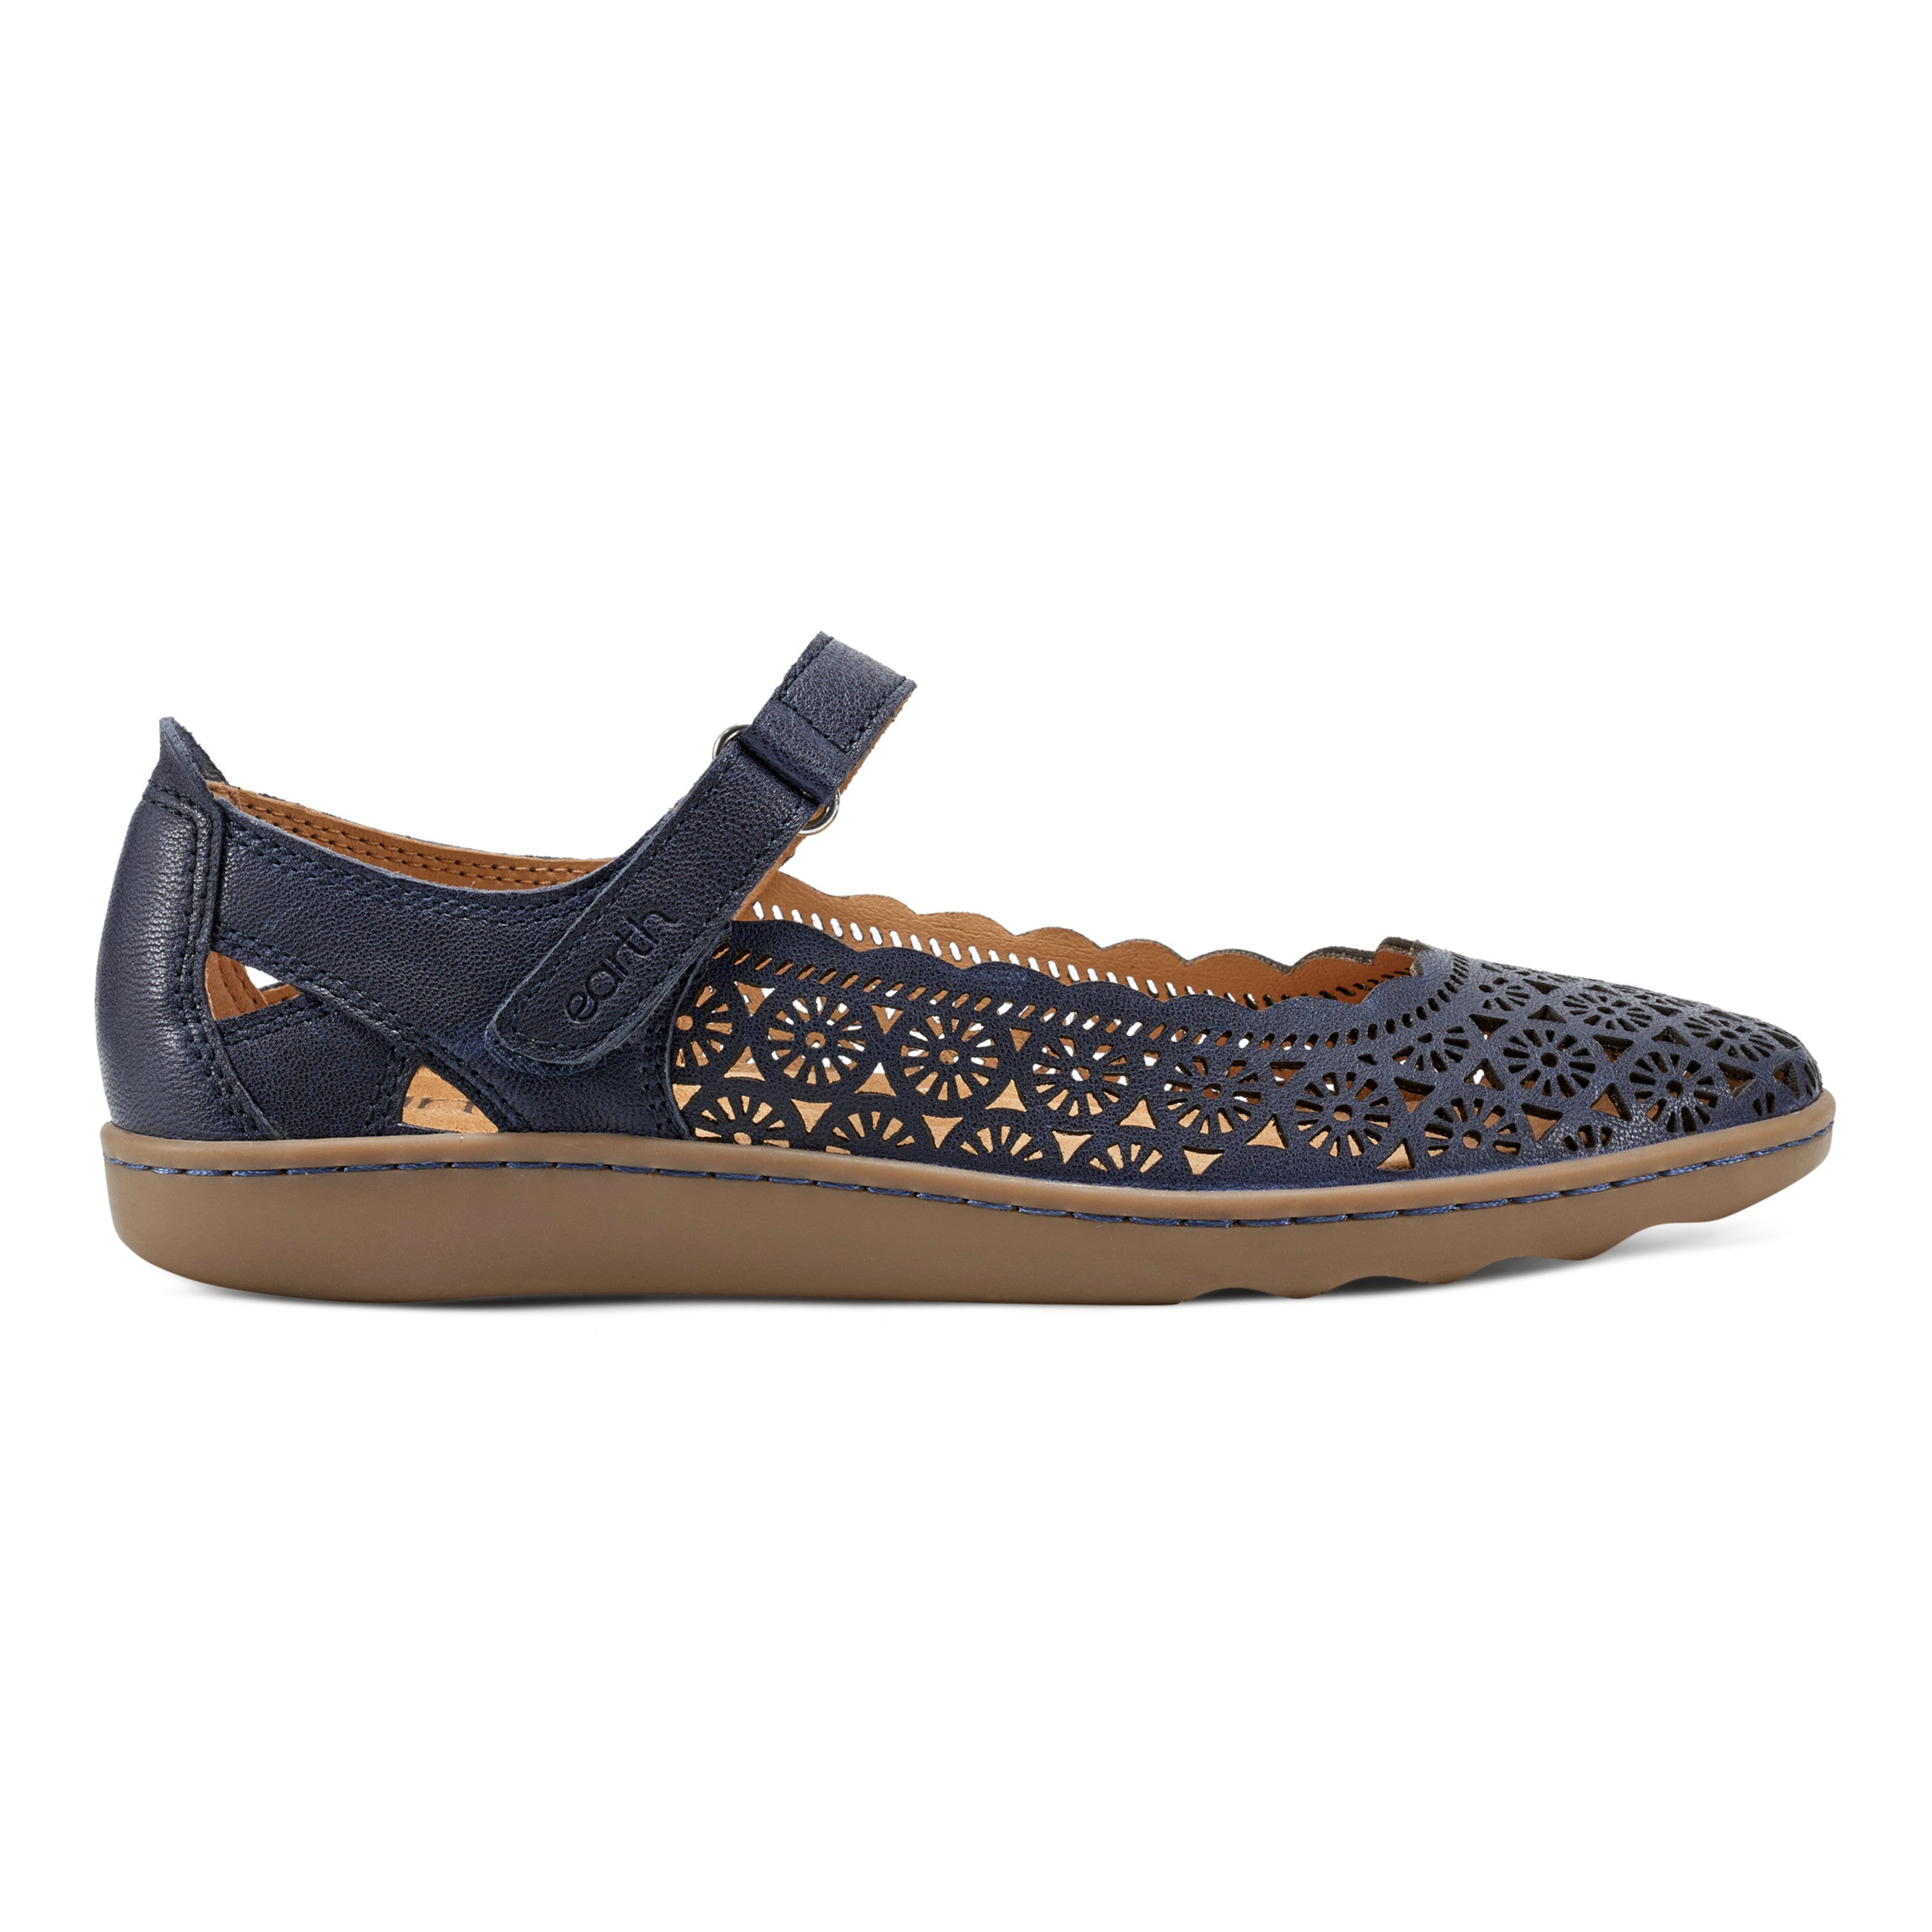 Lady Perforated Slip-On Ballet Flat